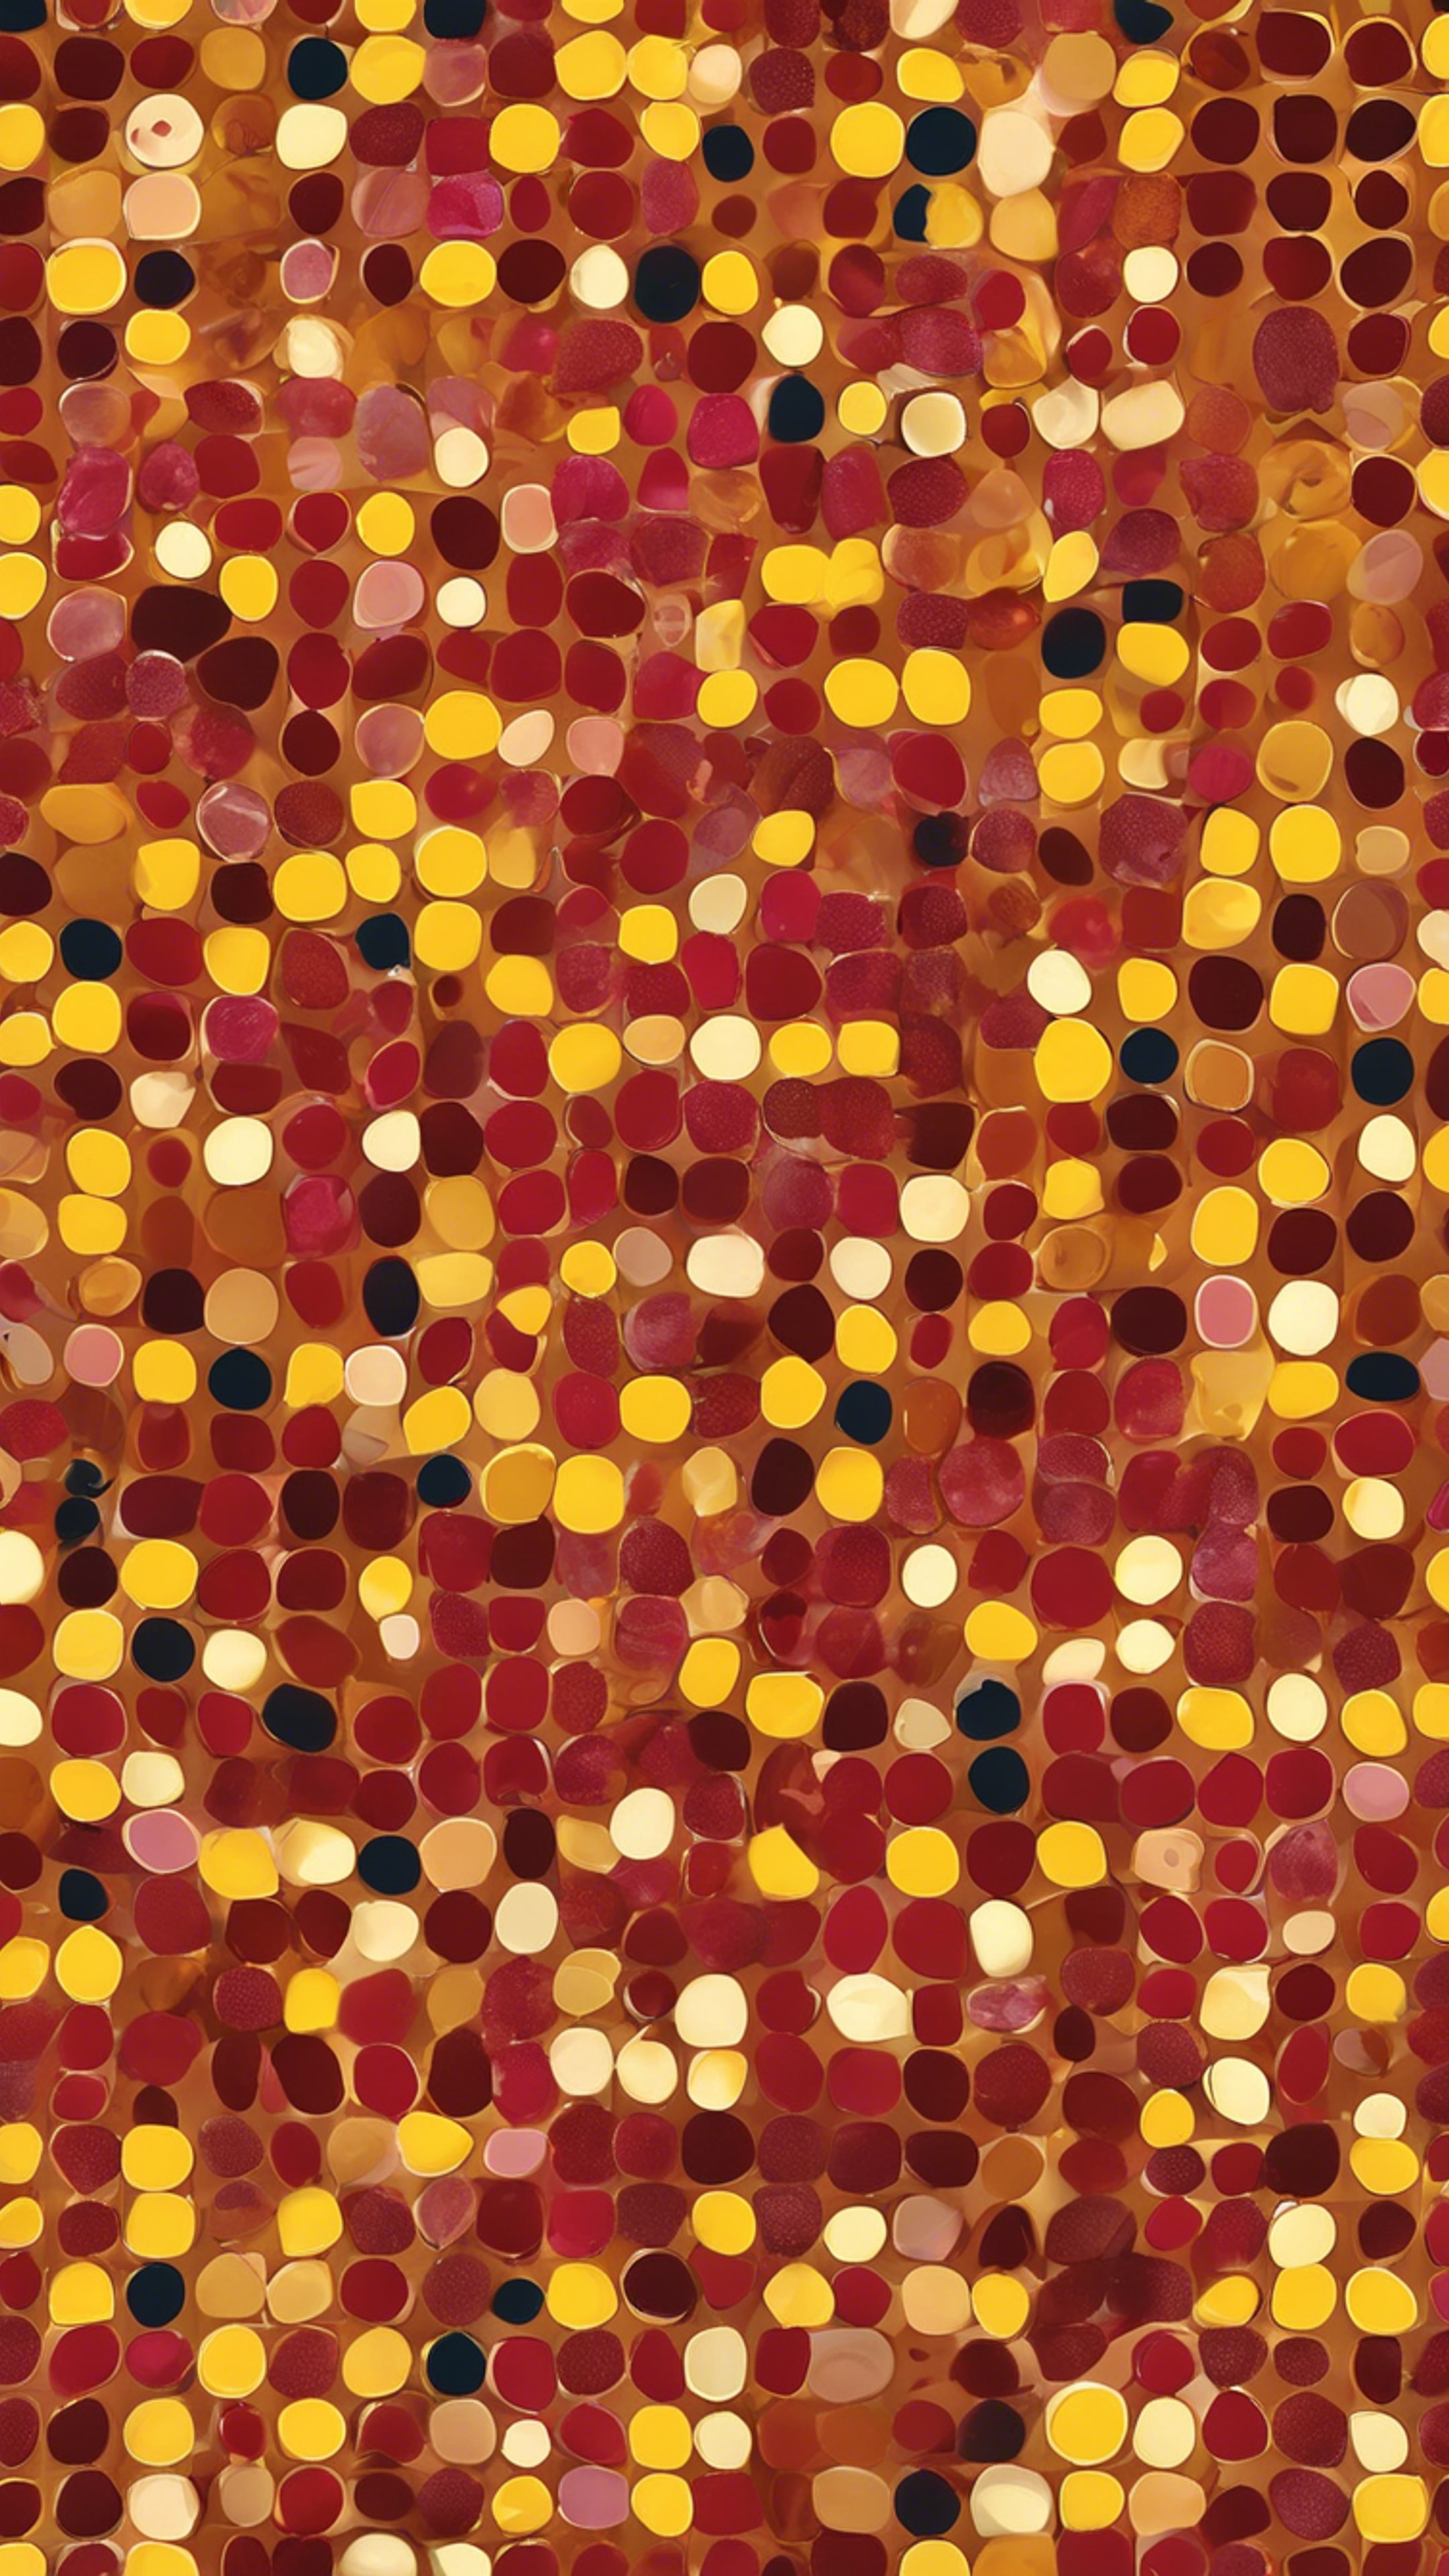 Vibrant pattern of polka dots, a mix of ruby red ones and mustard yellow ones. Behang[8e468345fc0d4ef4ba5a]